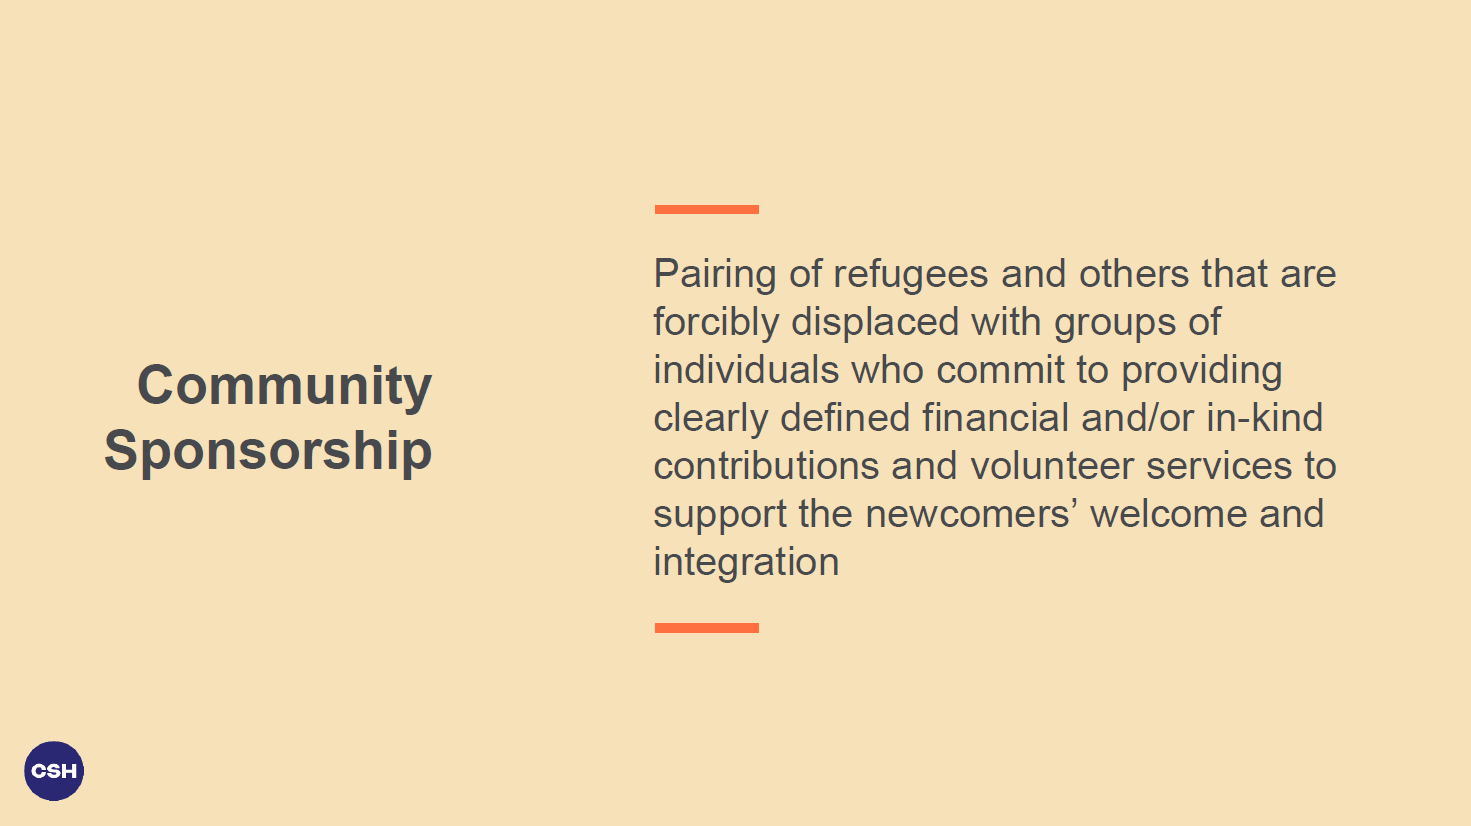 Community sponsorship: Pairing of refugees and others that are forcibly displaced with groups of individuals who commit to providing clearly defined financial and/or in-kind contributions and volunteer services to support the newcomers’ welcome and integration